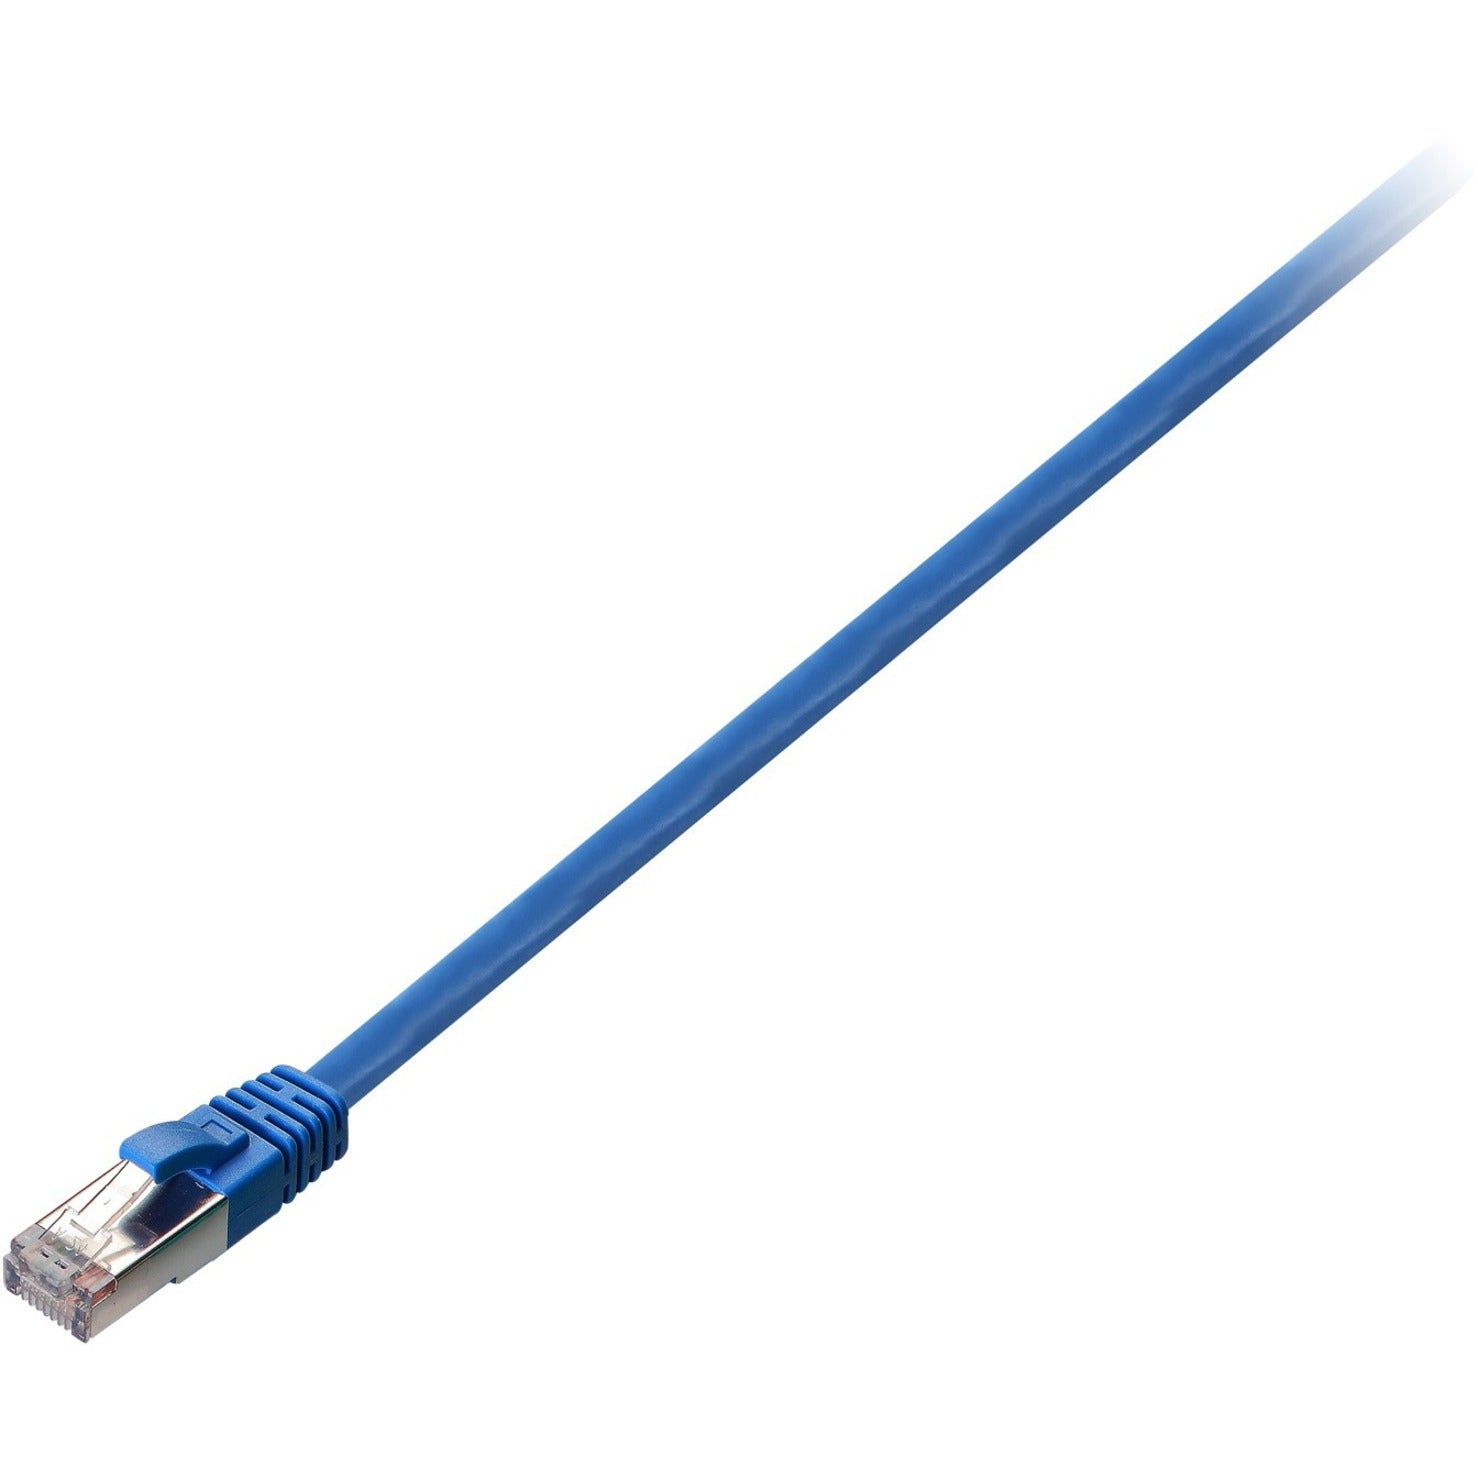 V7 V7CAT5STP-02M-BLU-1N Blue Cat5e Shielded (STP) Cable RJ45 Male to RJ45 Male 2m 6.6ft, Molded, Booted, Locking Latch, Strain Relief, Noise Reducing